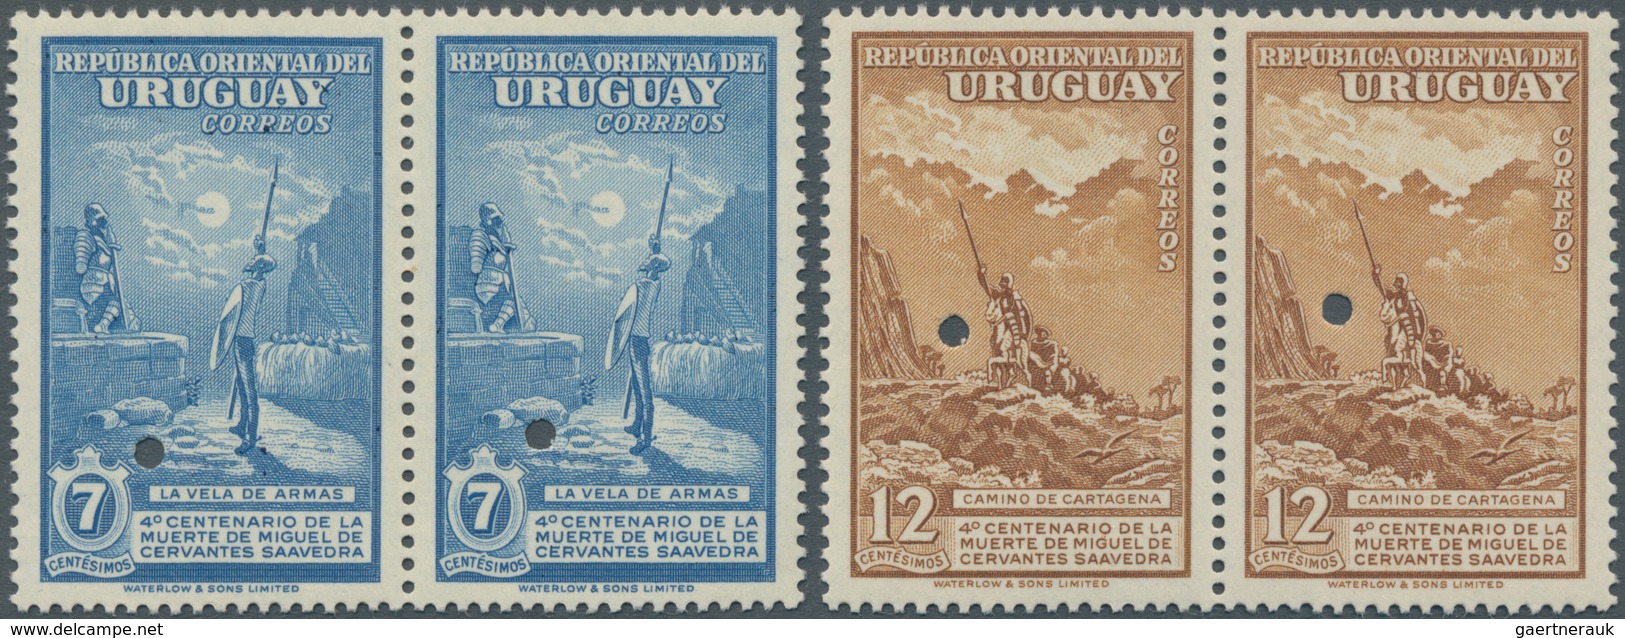 12611 Uruguay: 1947. Lot Of 2 NON-ISSUED Pairs: 7c Blue And 12c Brown. Erroneous Inscriptions: "4° Centena - Uruguay